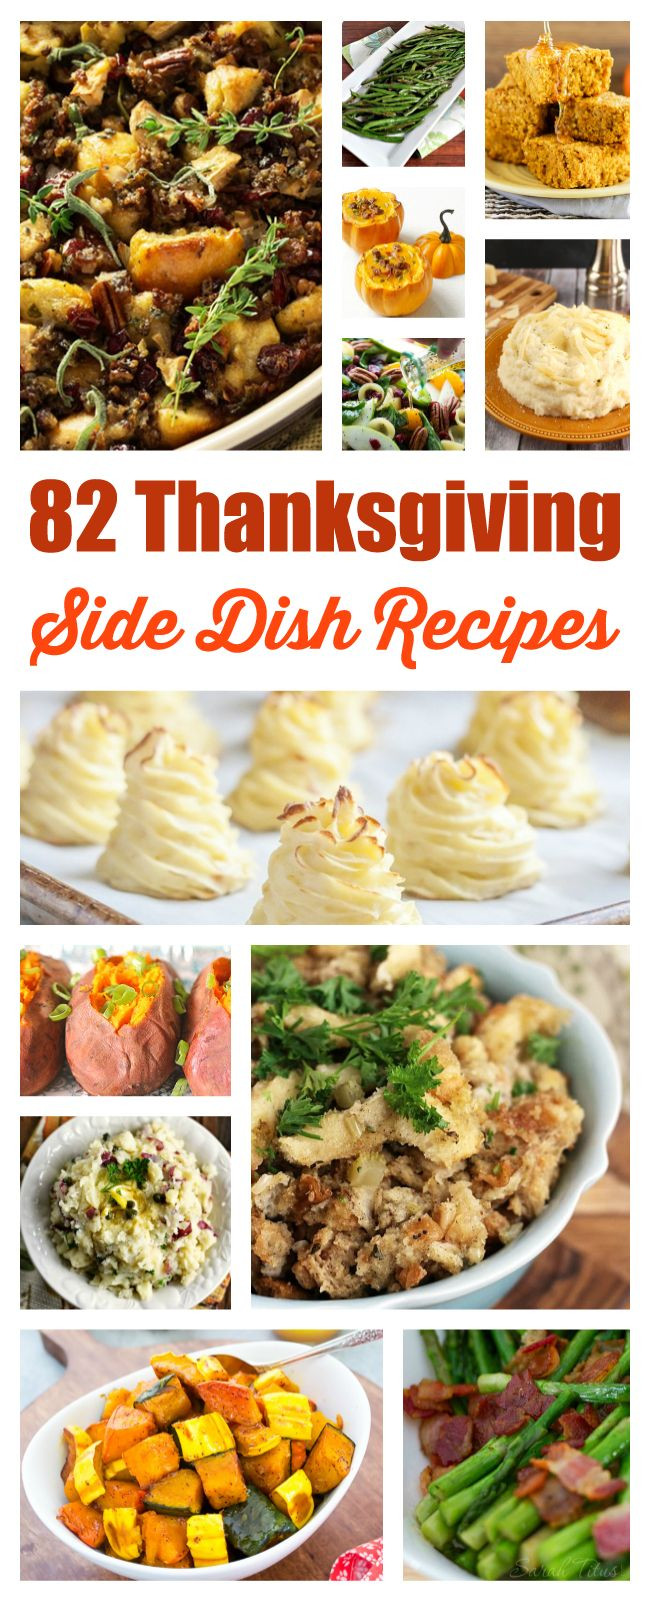 Thanksgiving Side Dishes Recipes
 71 best images about Thanksgiving Sides with a Twist on